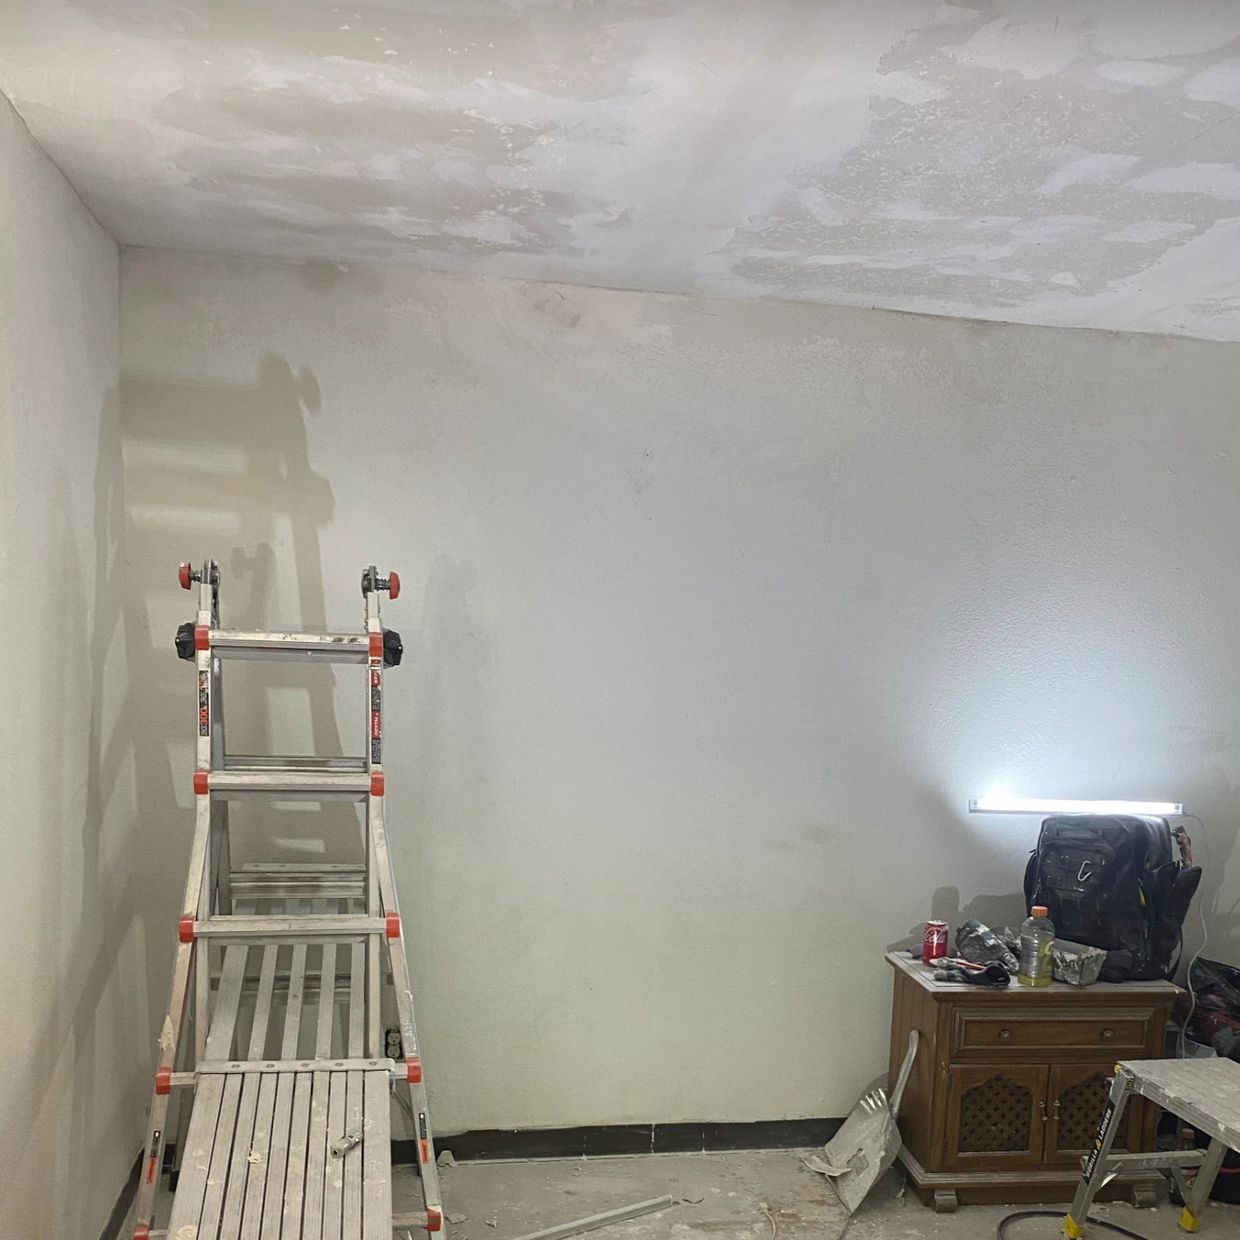 Drywall repairs drywall replacement drywall installer Ceiling drywall company contractor 